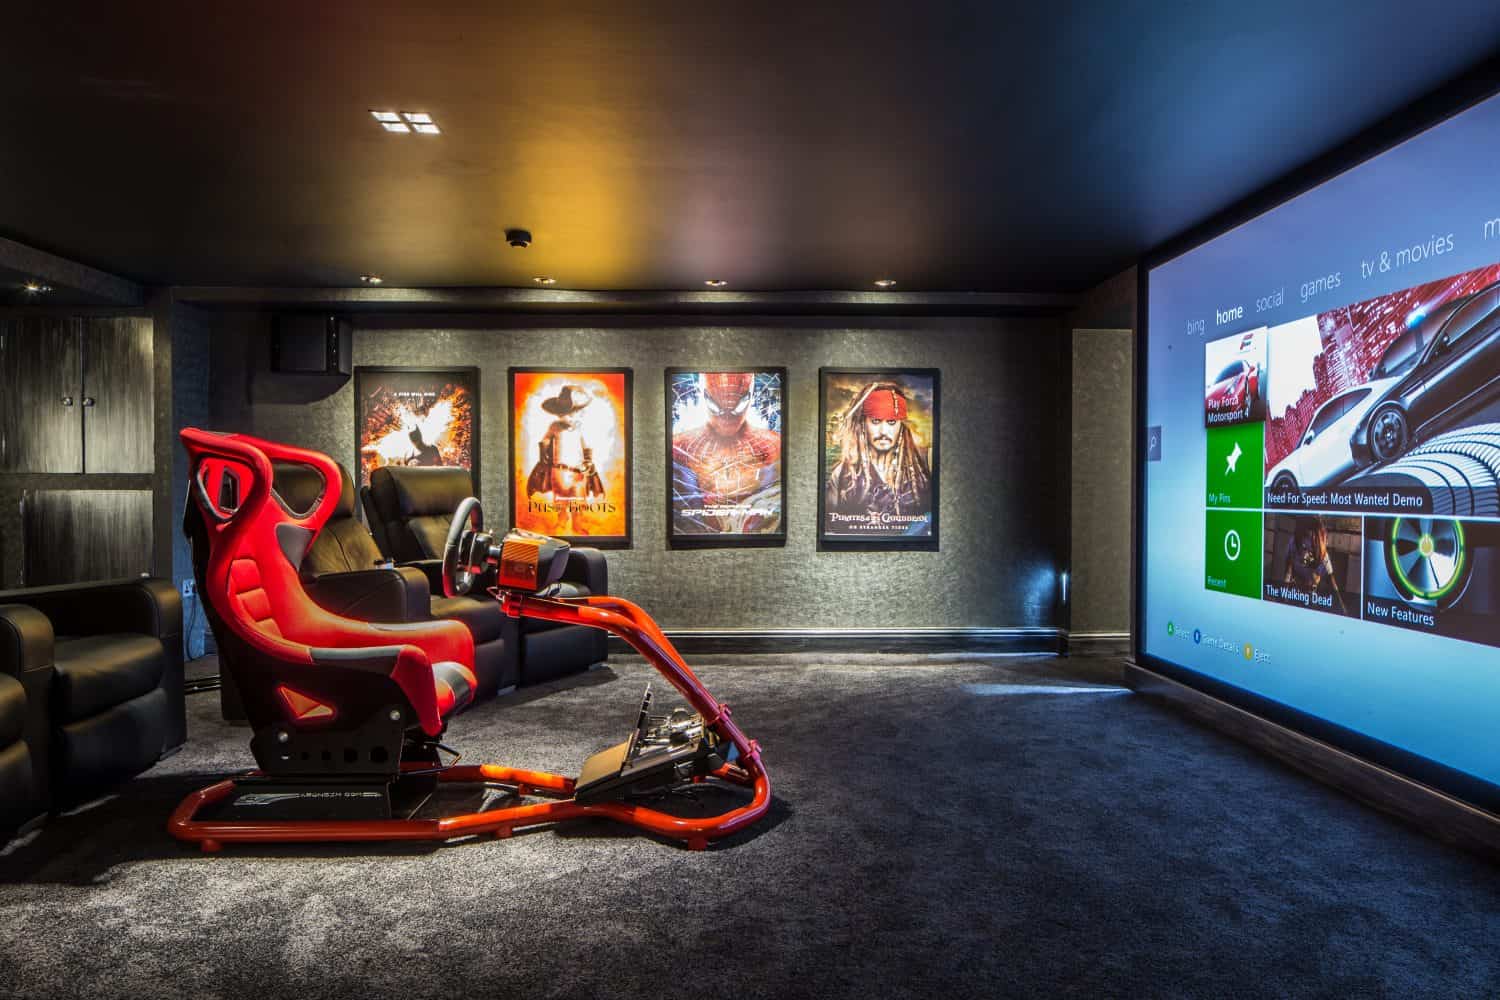 A gamer's haven where cutting-edge technology and comfort intertwine, featuring a sleek gaming PC, a captivating curved ultrawide monitor, and ergonomic seating, all bathed in the ambiance of gaming passion.